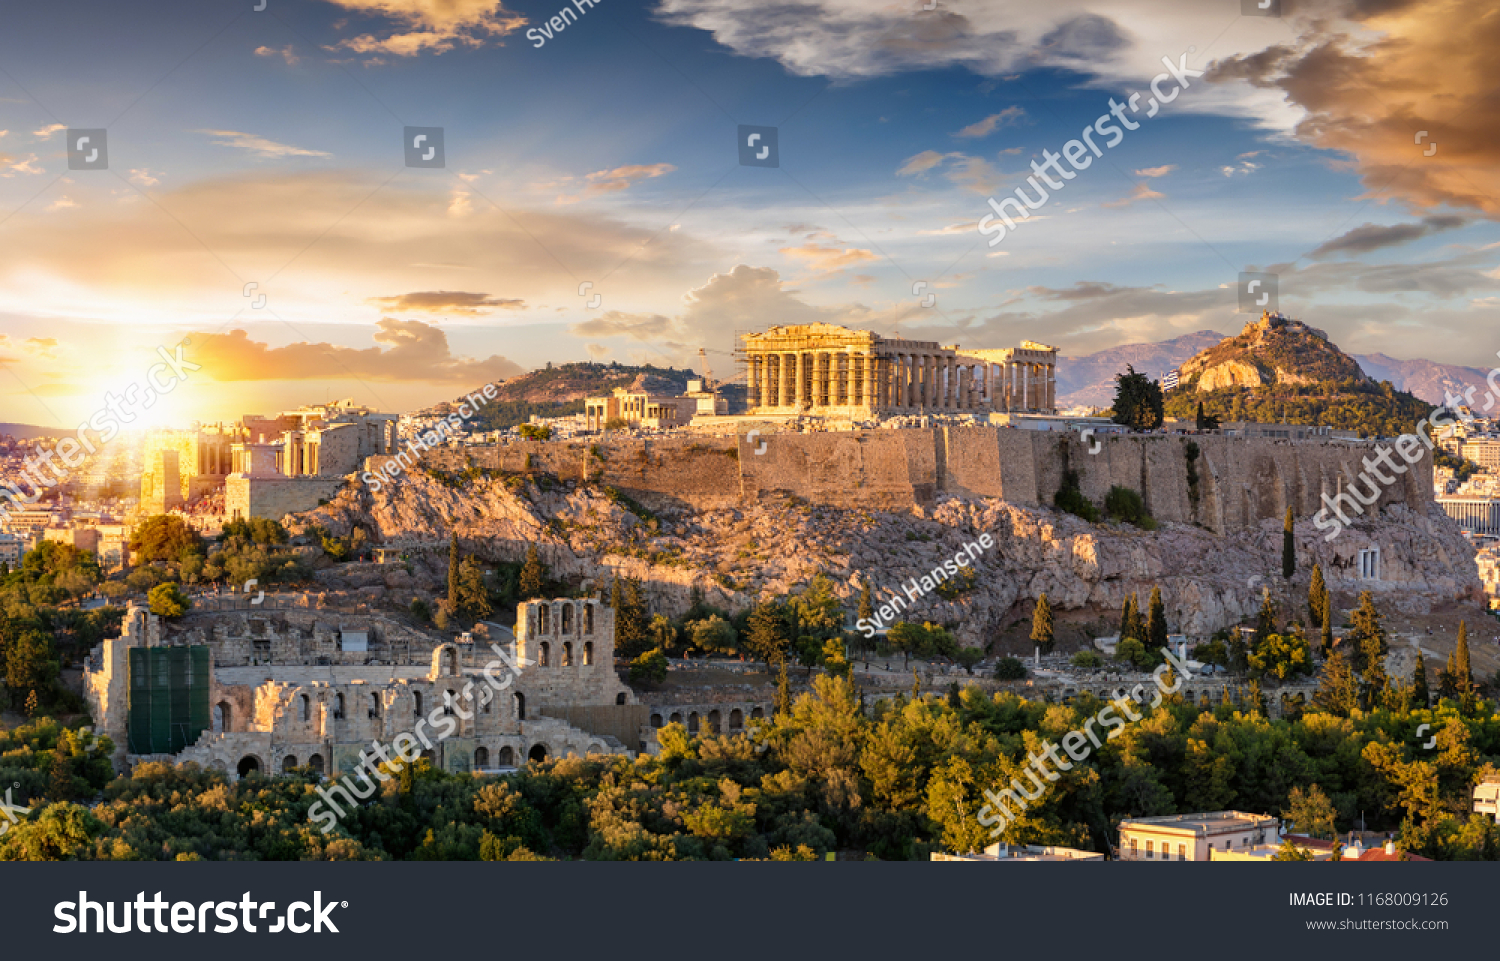 The Acropolis of Athens, Greece, with the Parthenon Temple on top of the hill during a summer sunset #1168009126